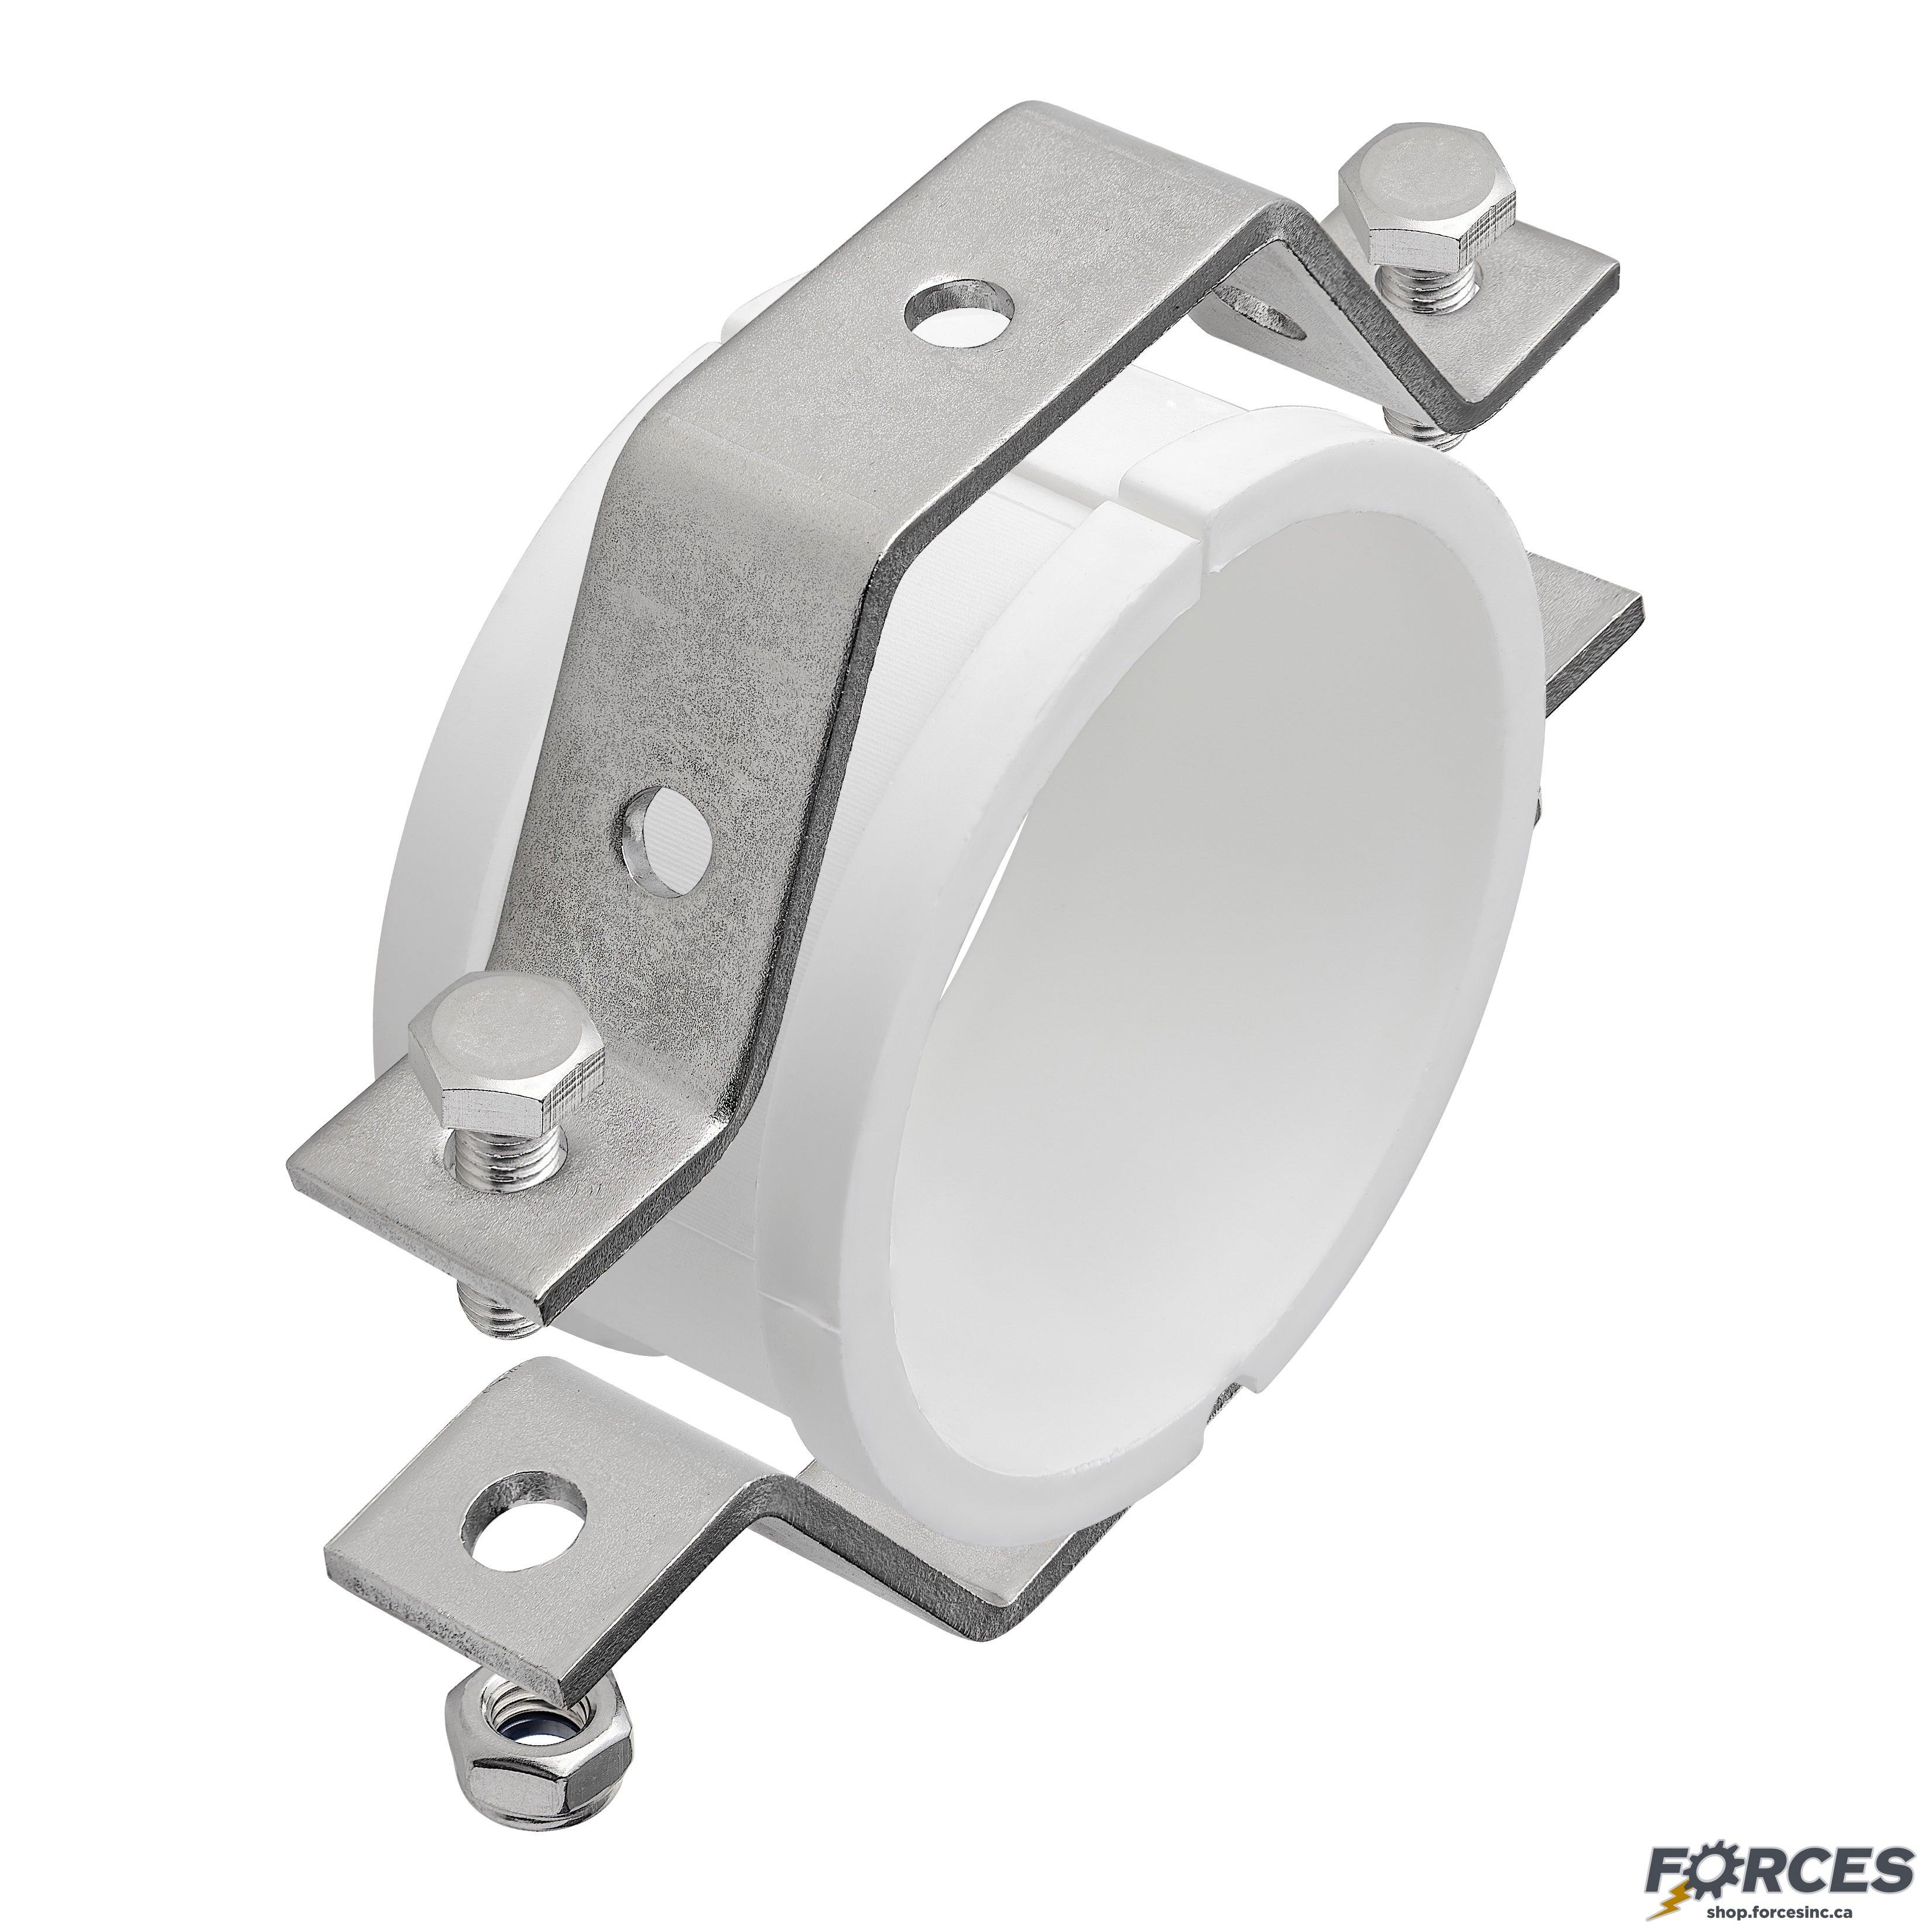 1" Hanger for Sanitary Tube With PVC Insert 304 Stainless Steel - Forces Inc